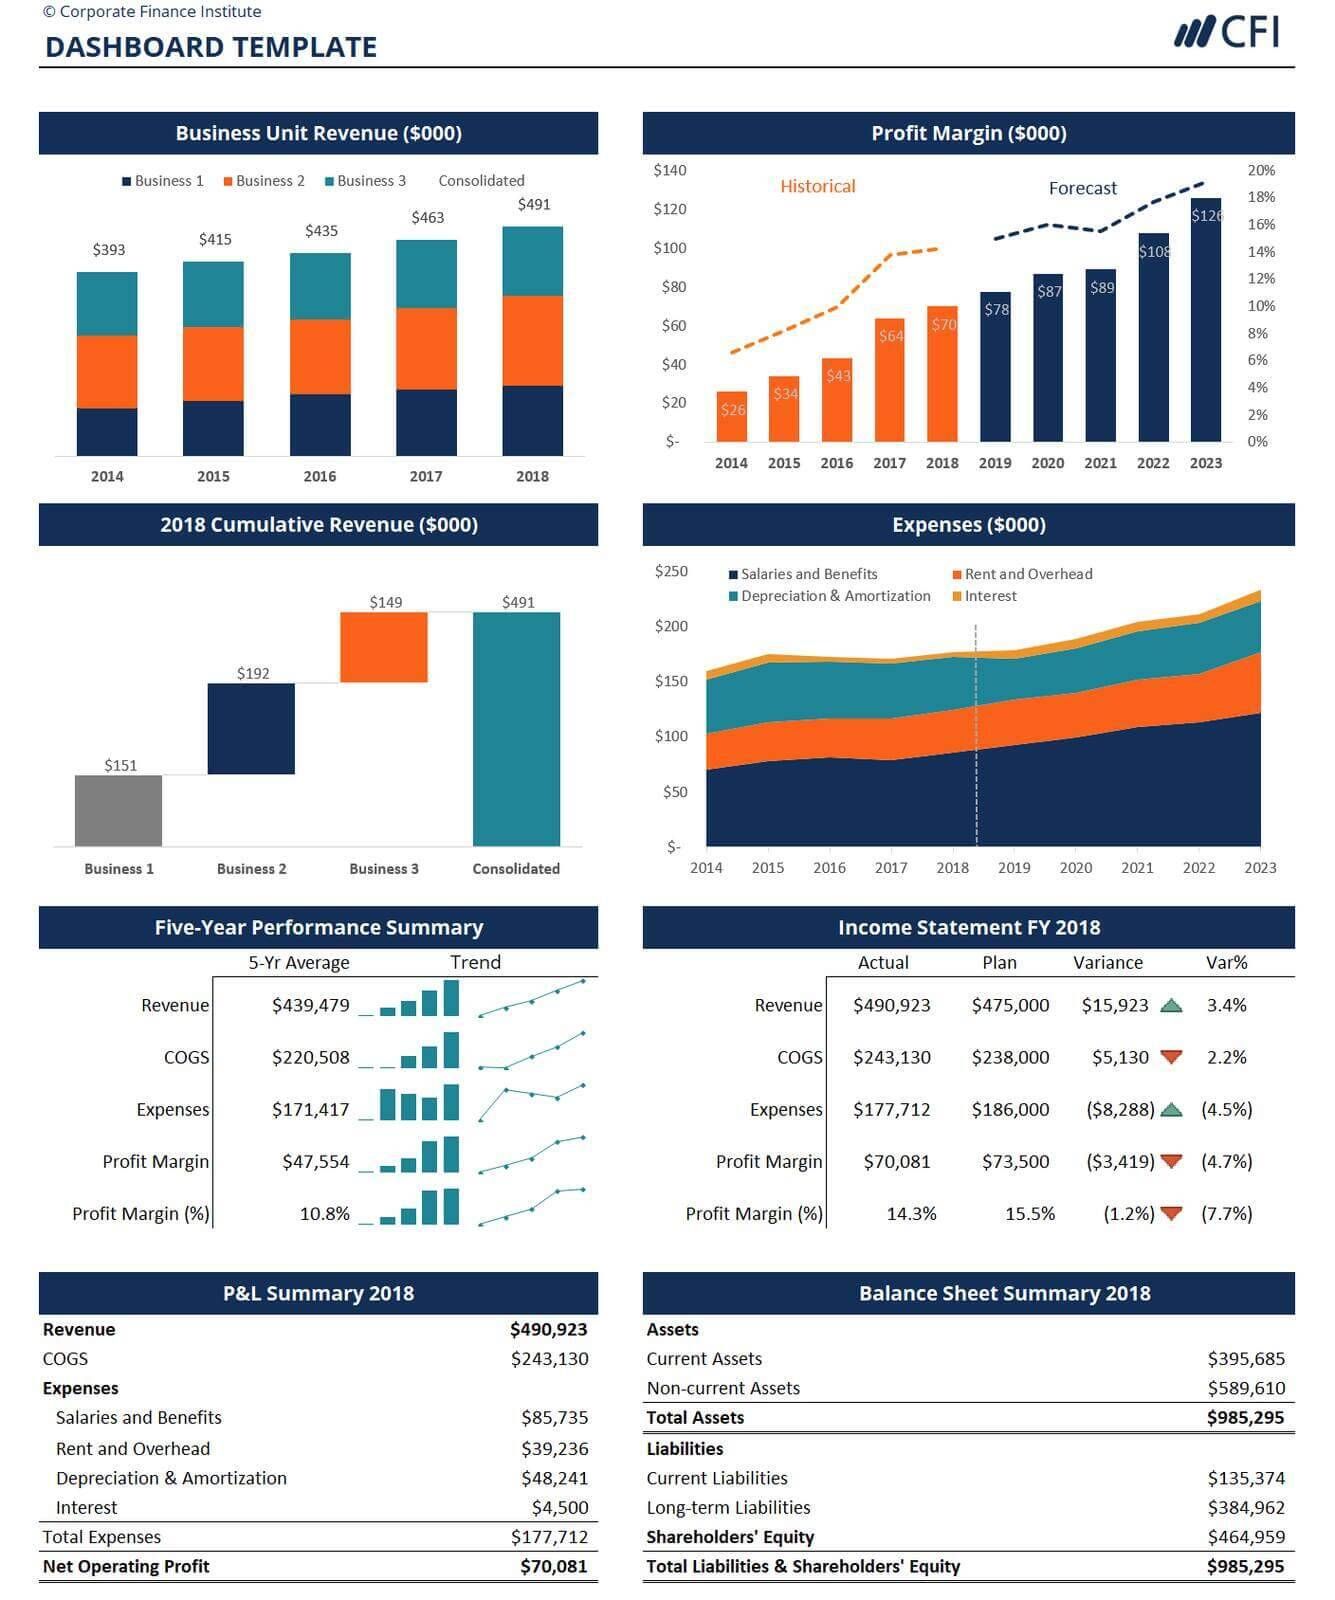 excel dashboard and Data Visualization templates